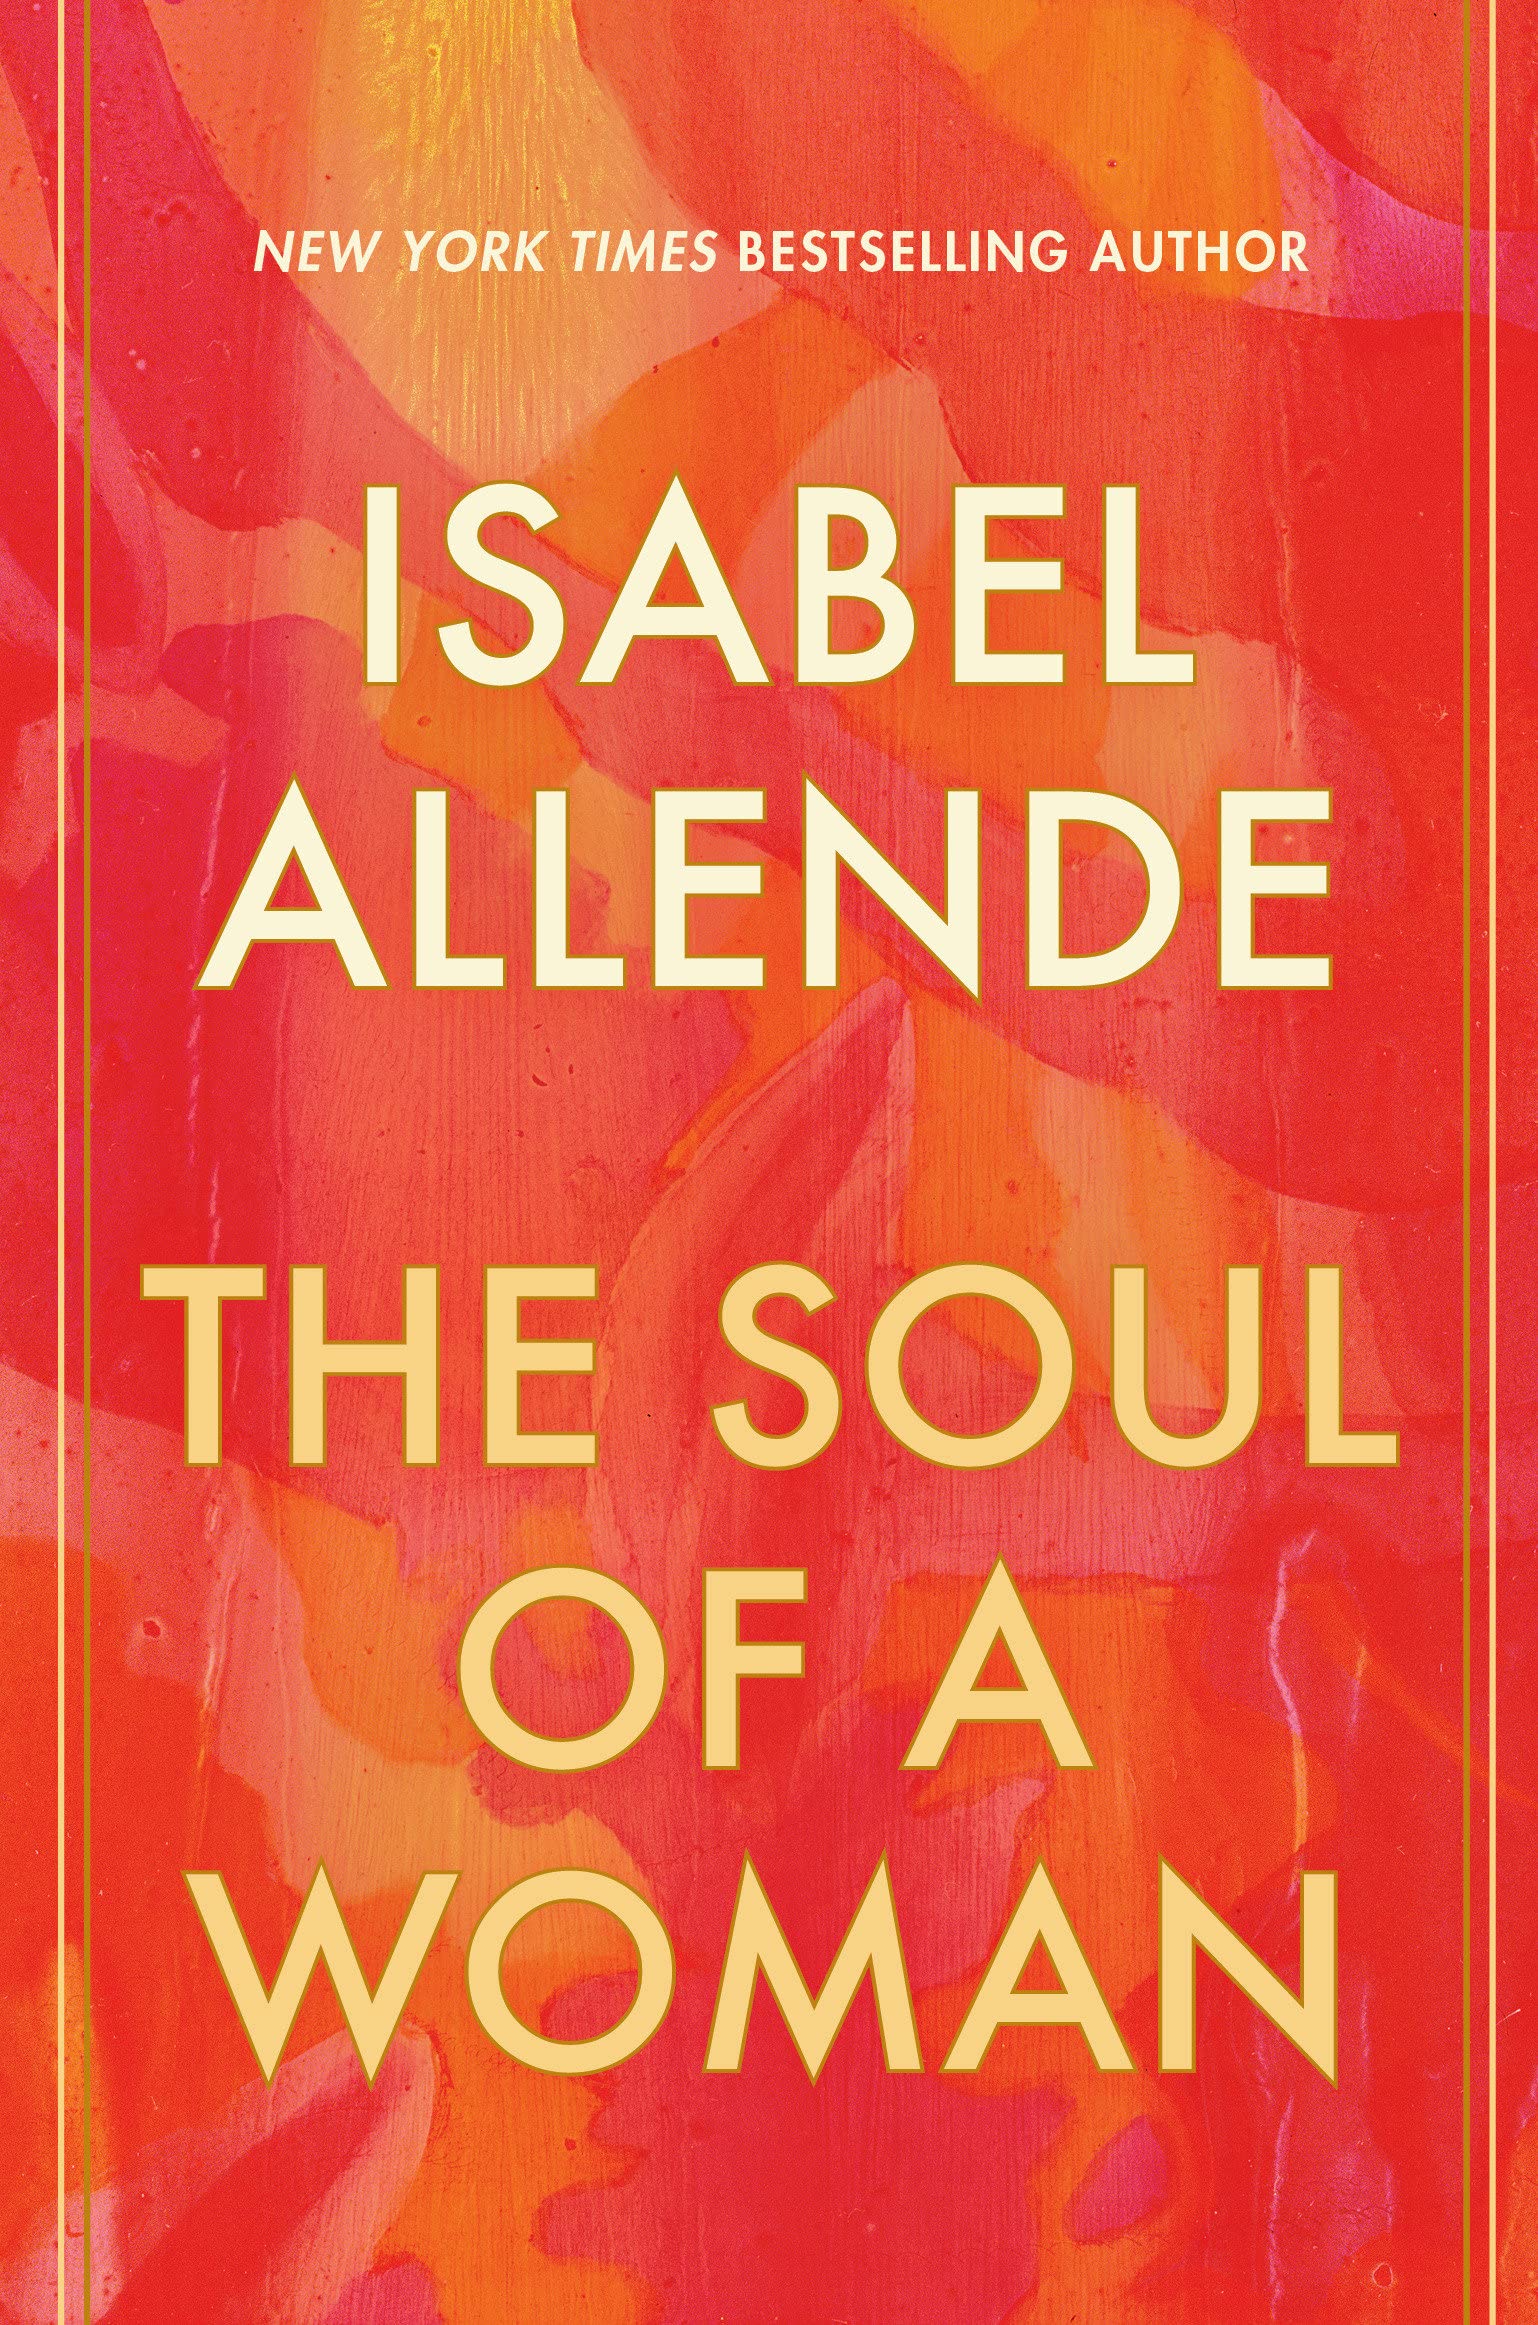 The Soul of a Woman (Hardcover)